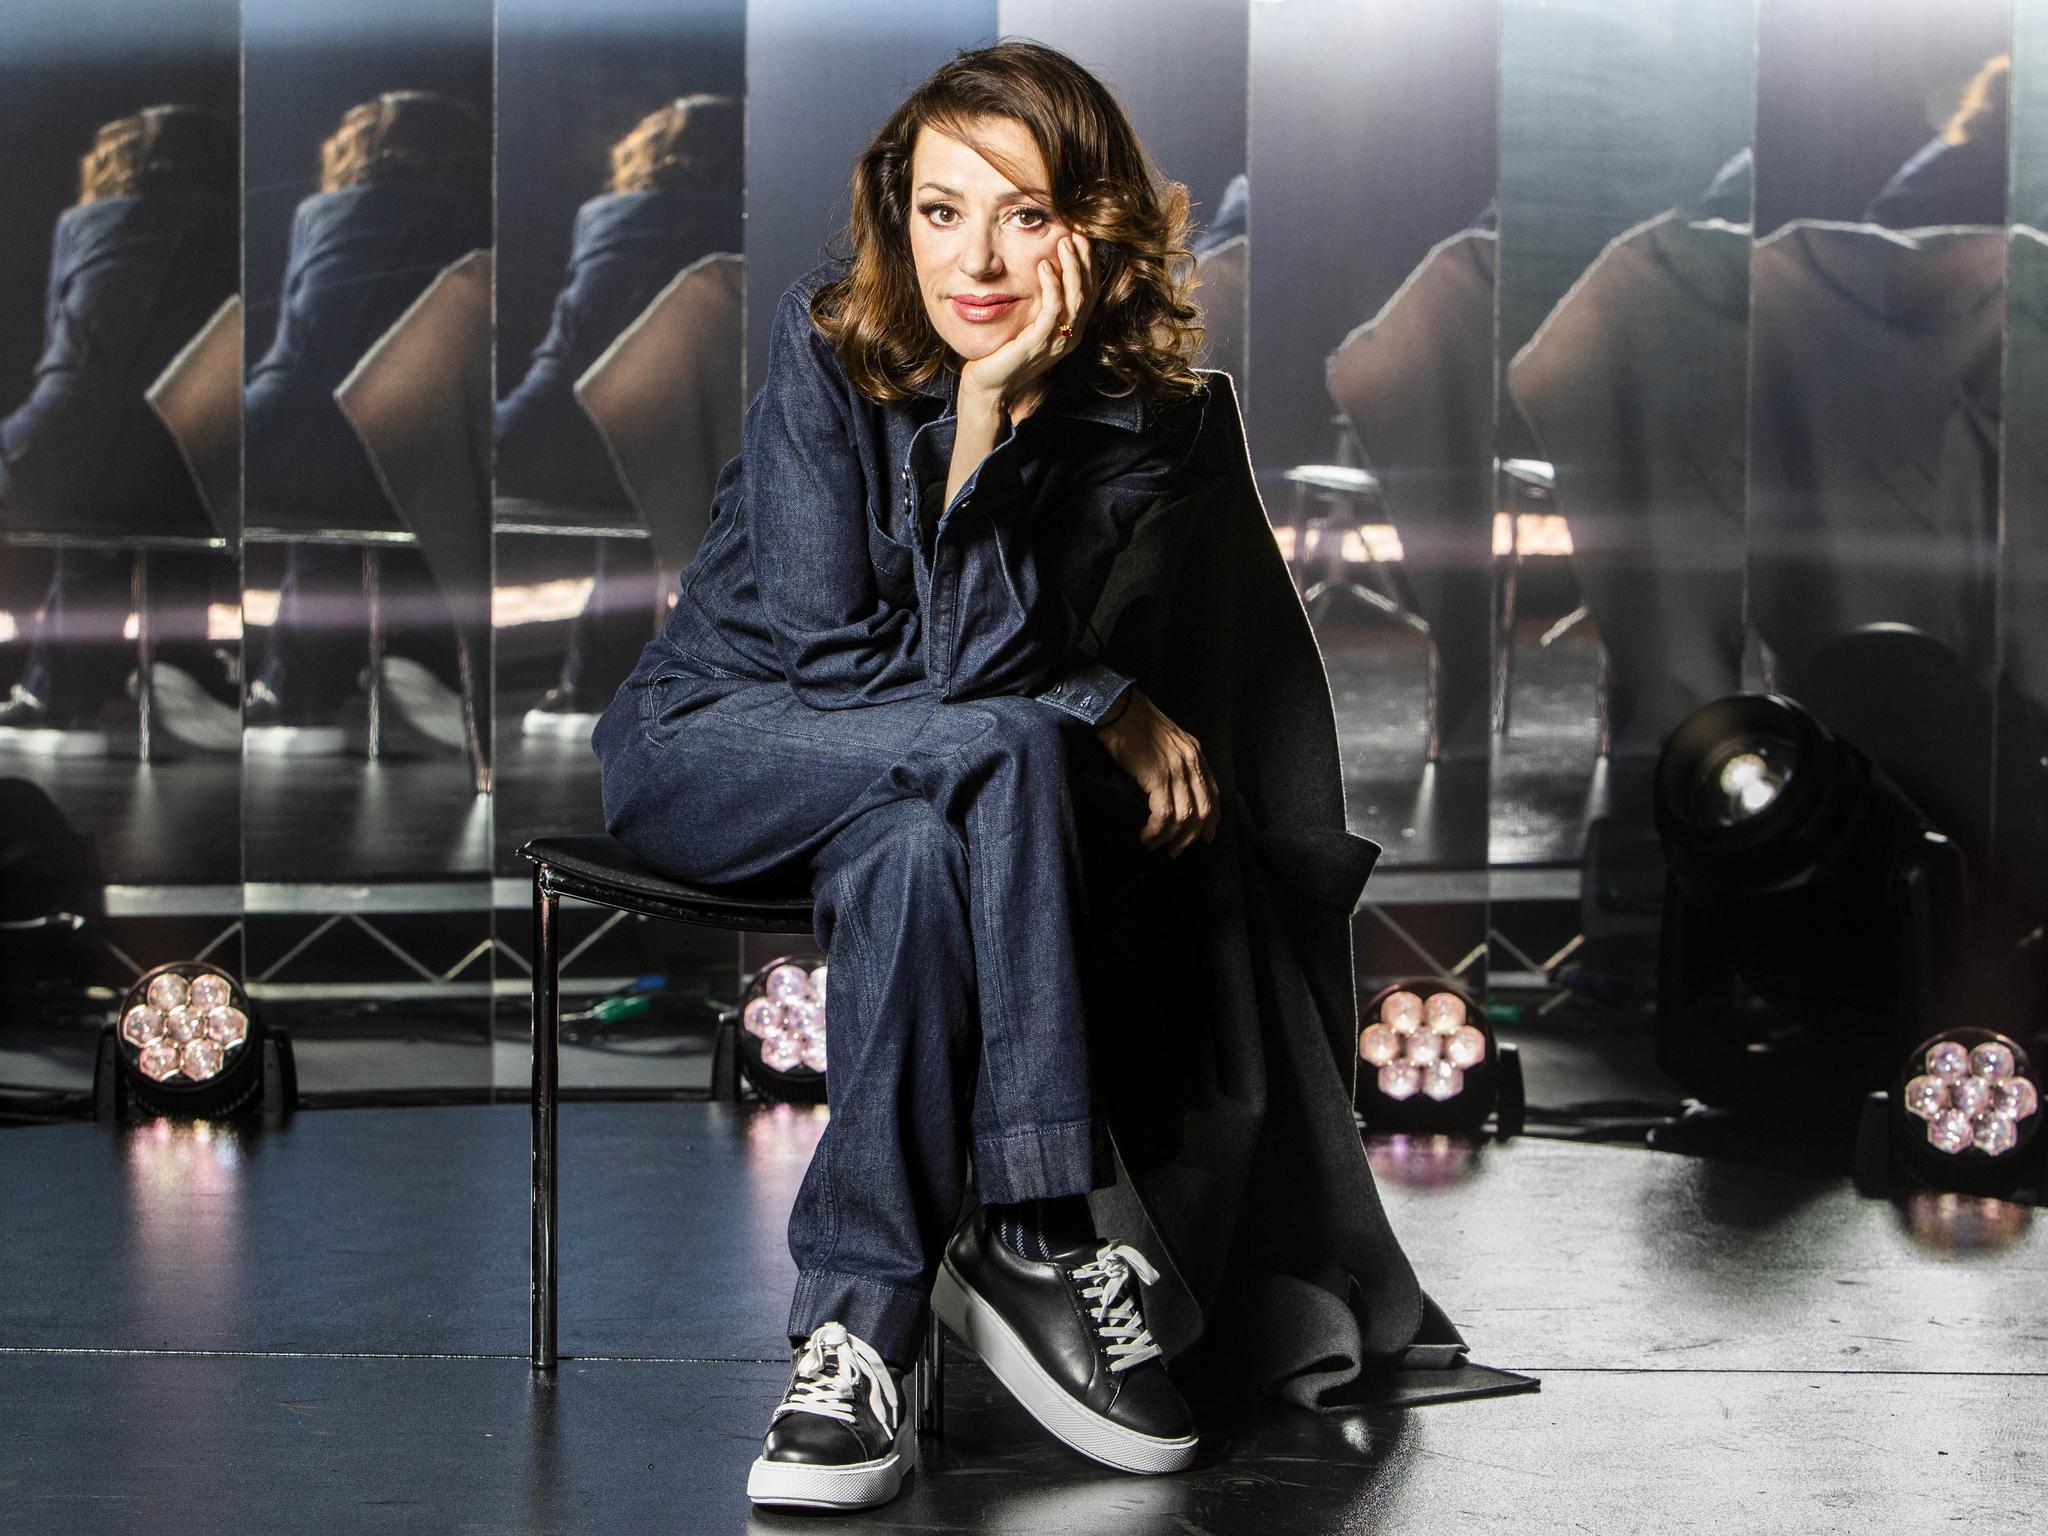 Tina Arena returns with new song Church ahead of national tour | The ...